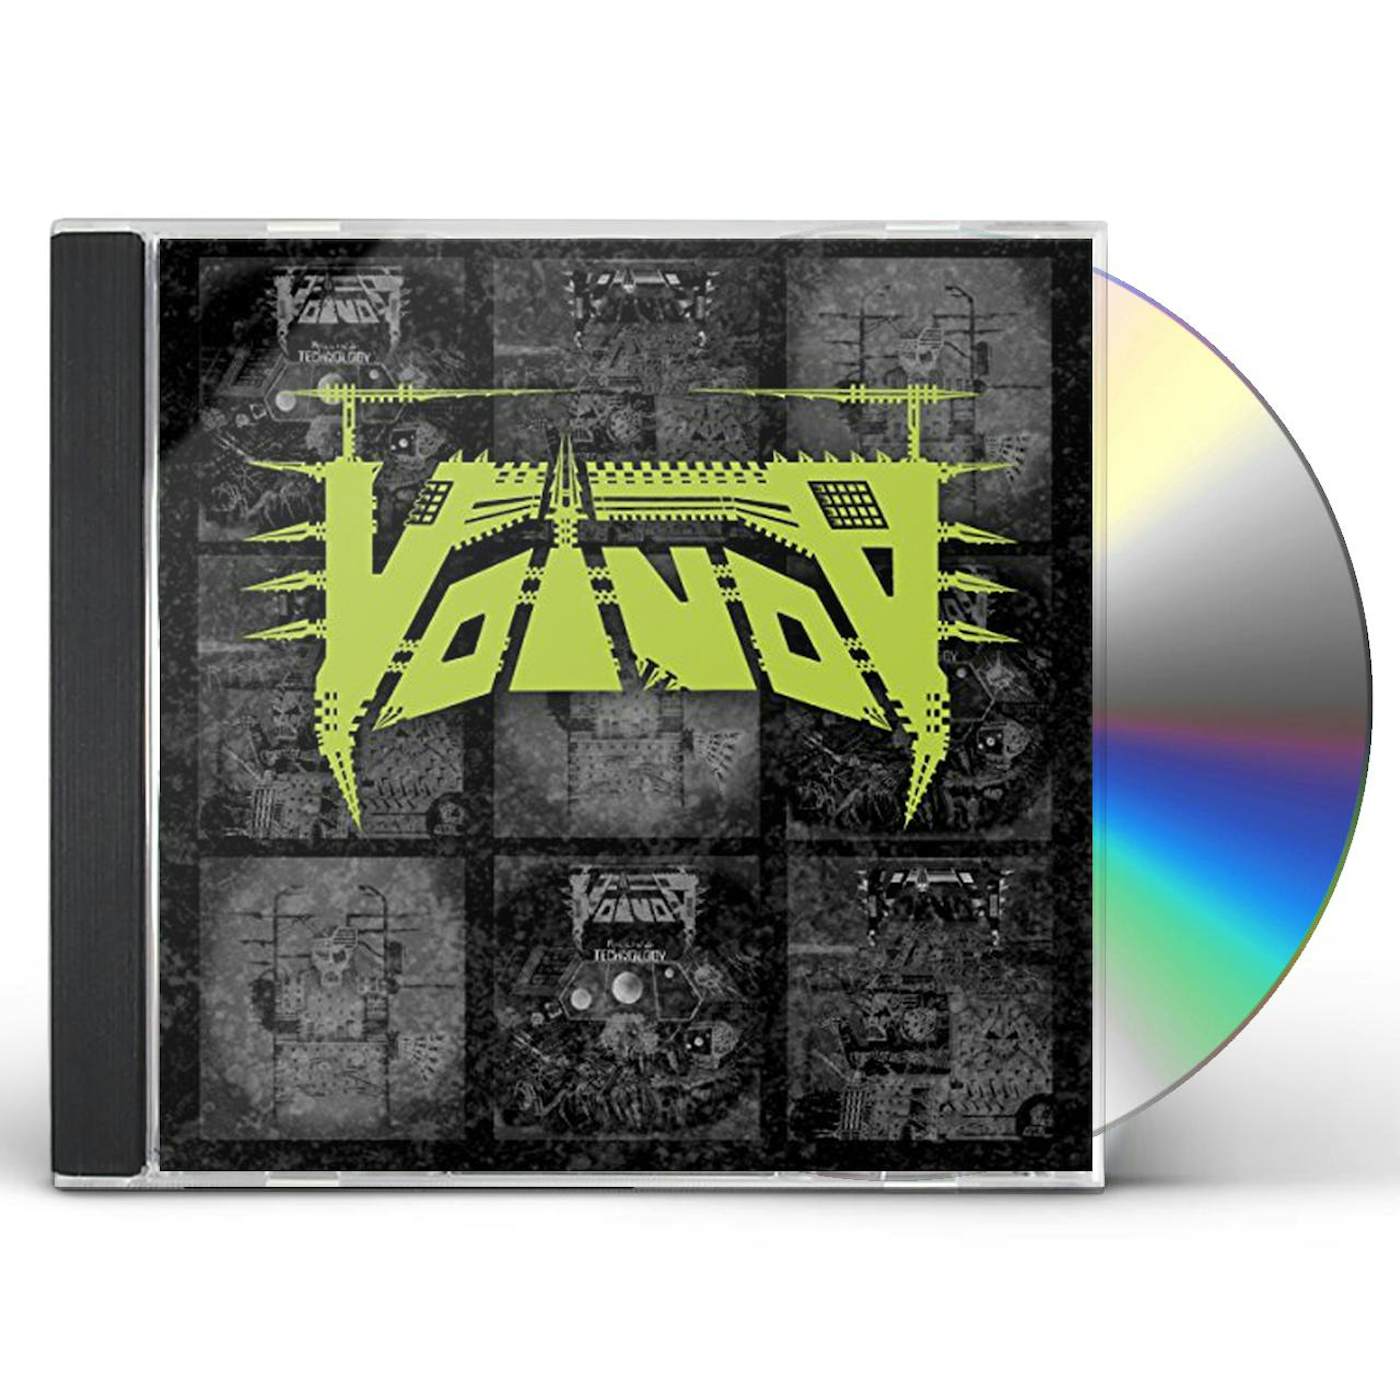 Voivod BUILD YOUR WEAPONS - THE VERY BEST OF THE NOISE YEARS 1986-1988 CD